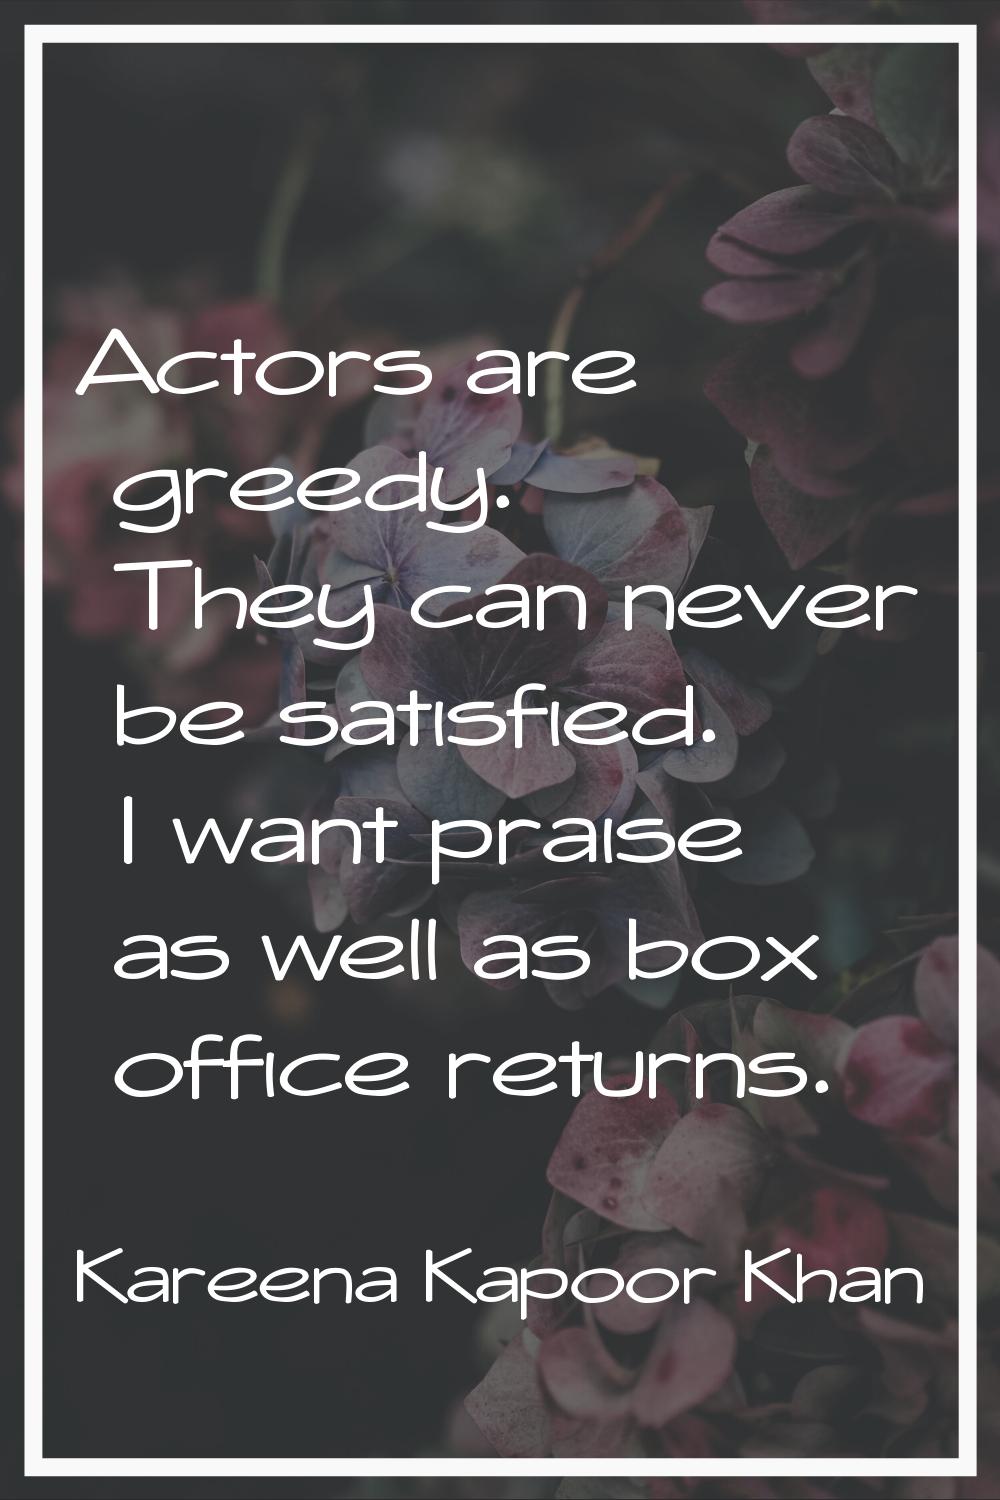 Actors are greedy. They can never be satisfied. I want praise as well as box office returns.